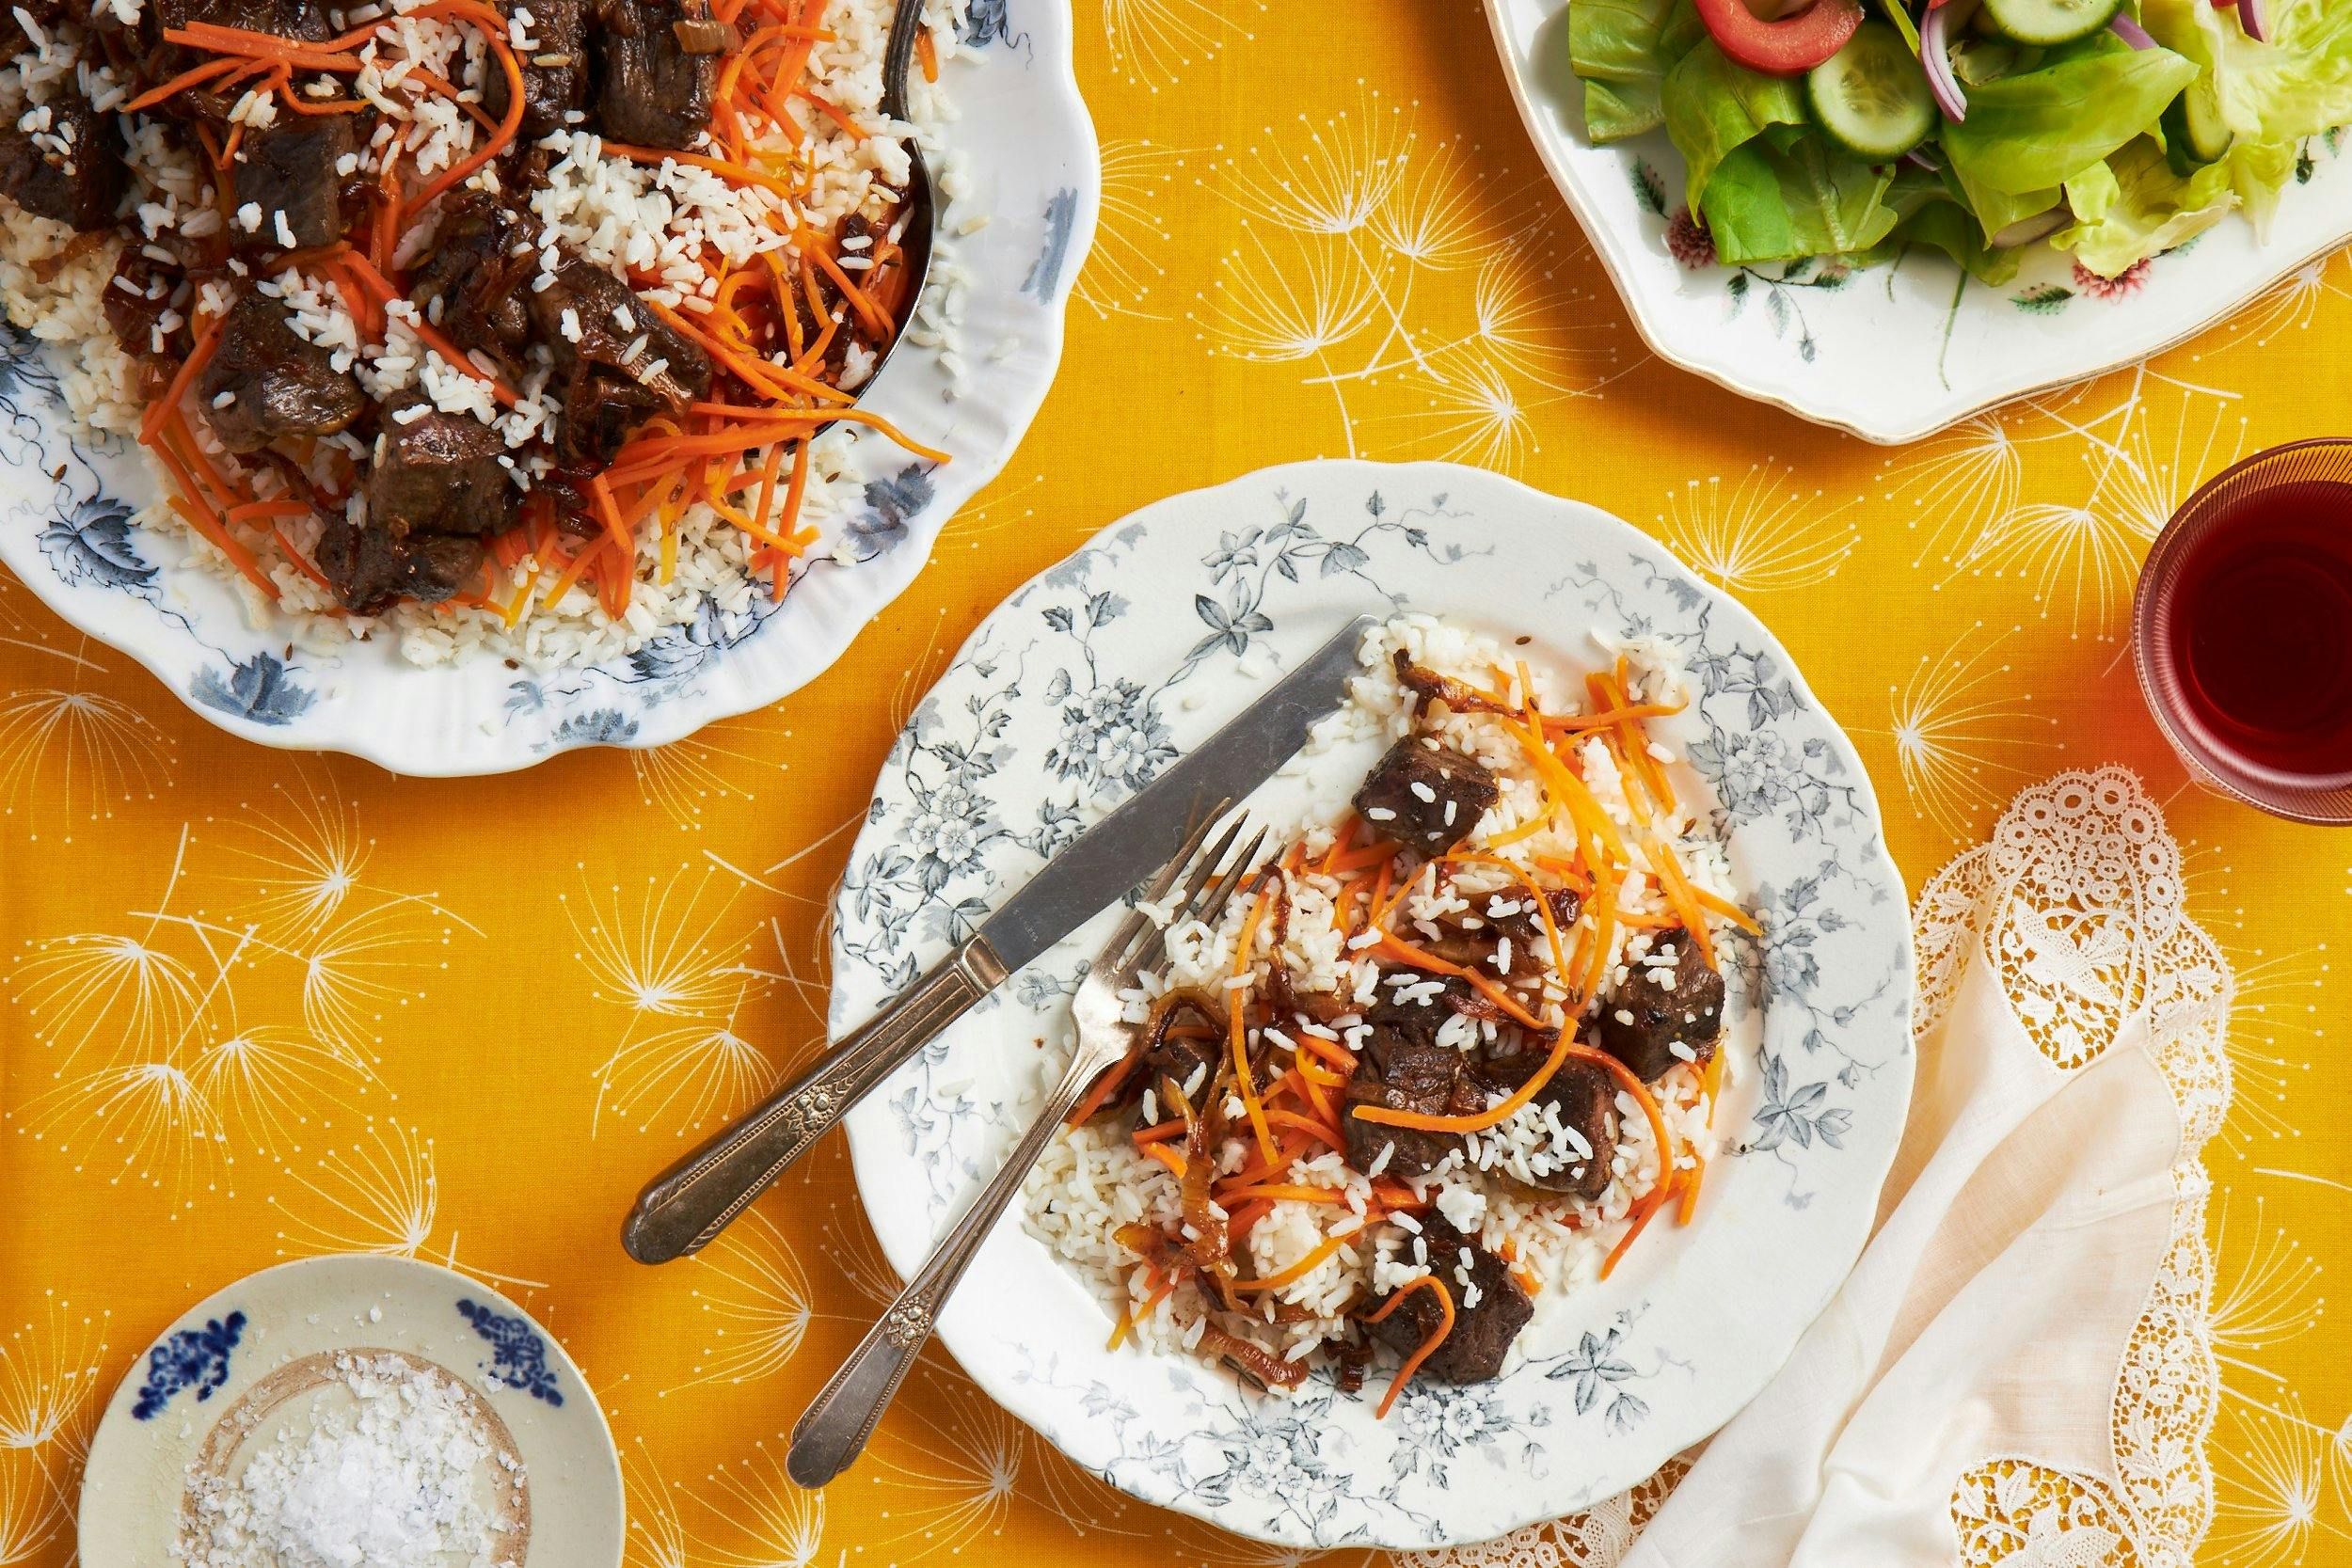 Plov with rice, beef, and carrots on white plate atop yellow tablecloth. 